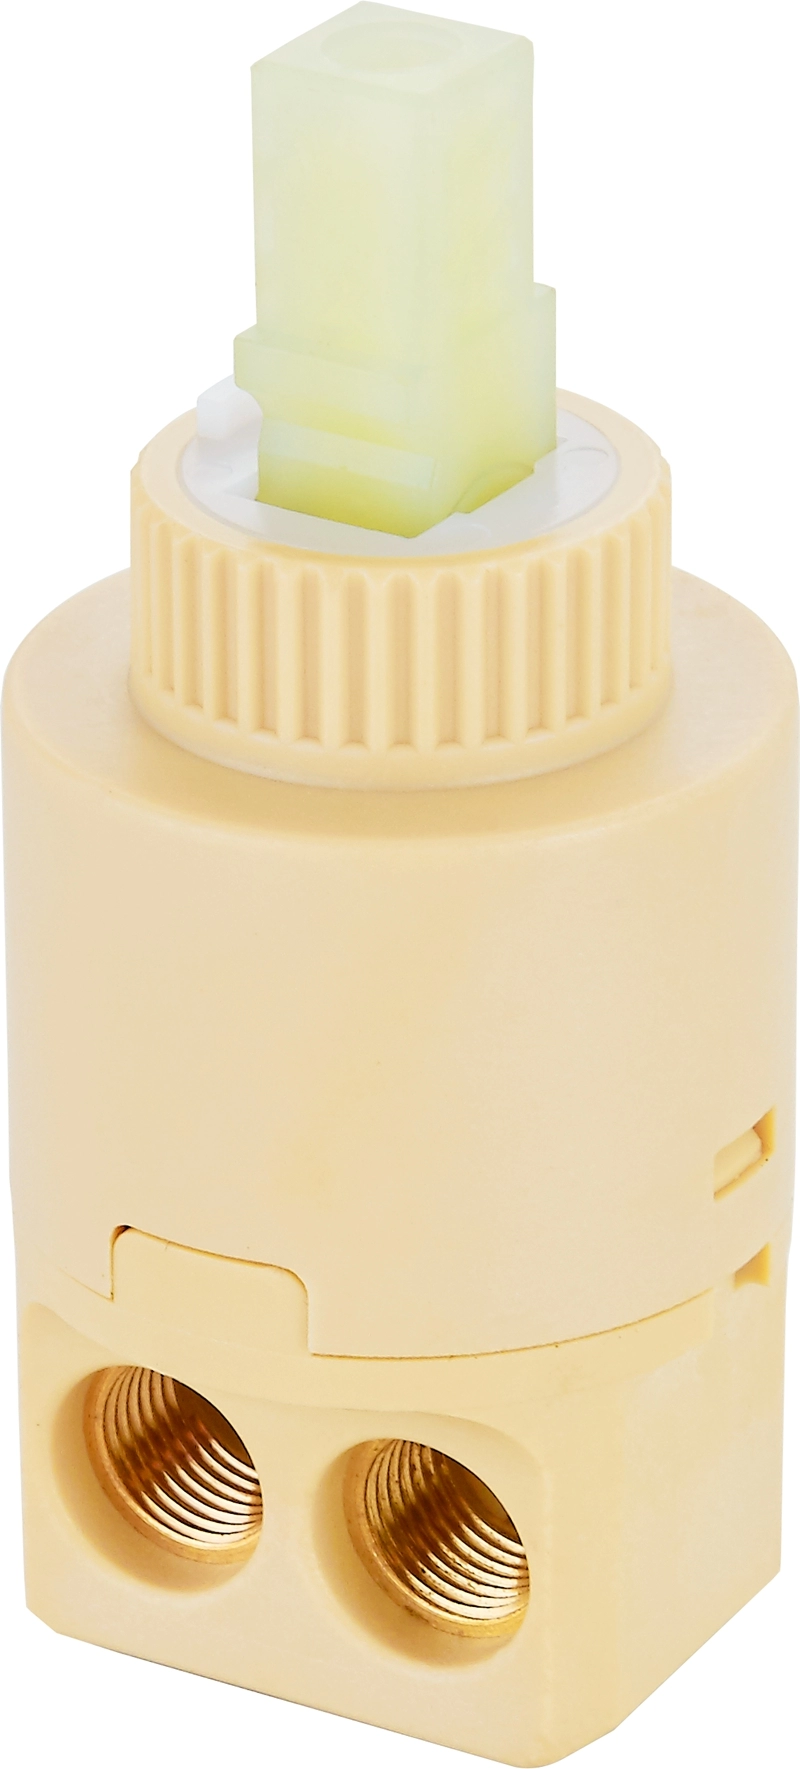 35mm Directly Connect Ceramic Cartridge without Distributor